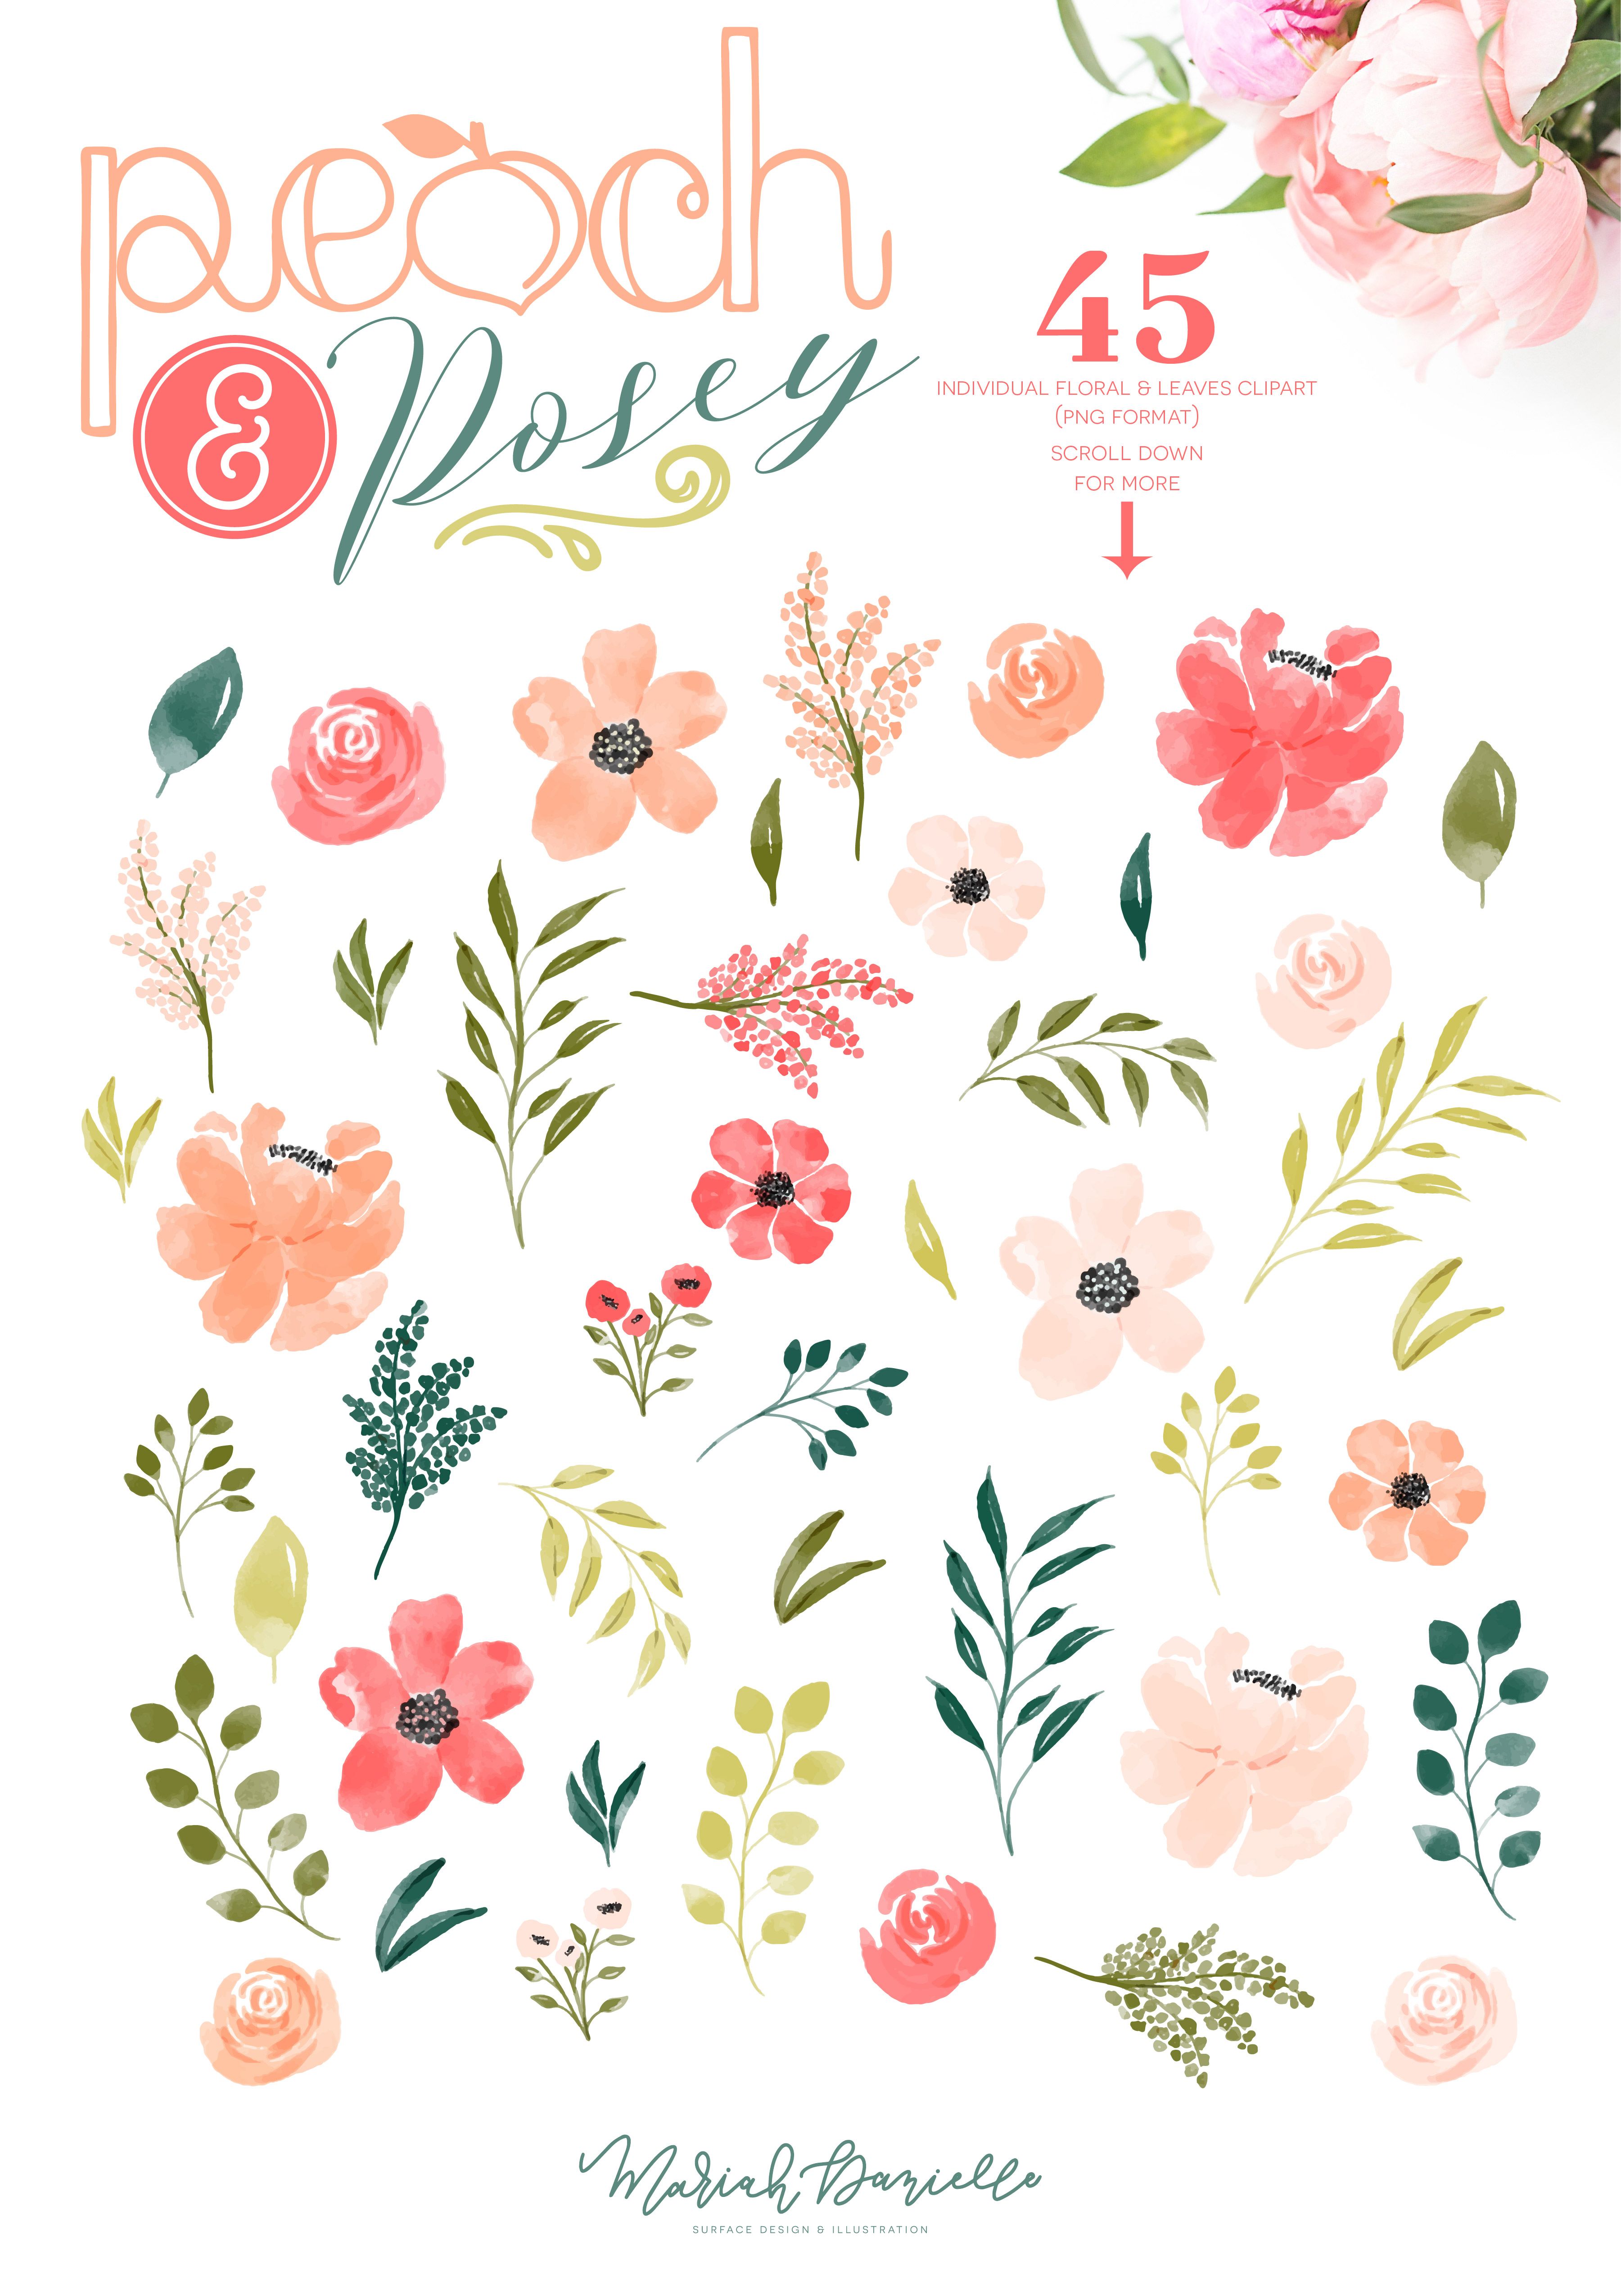 Peach posey floral.